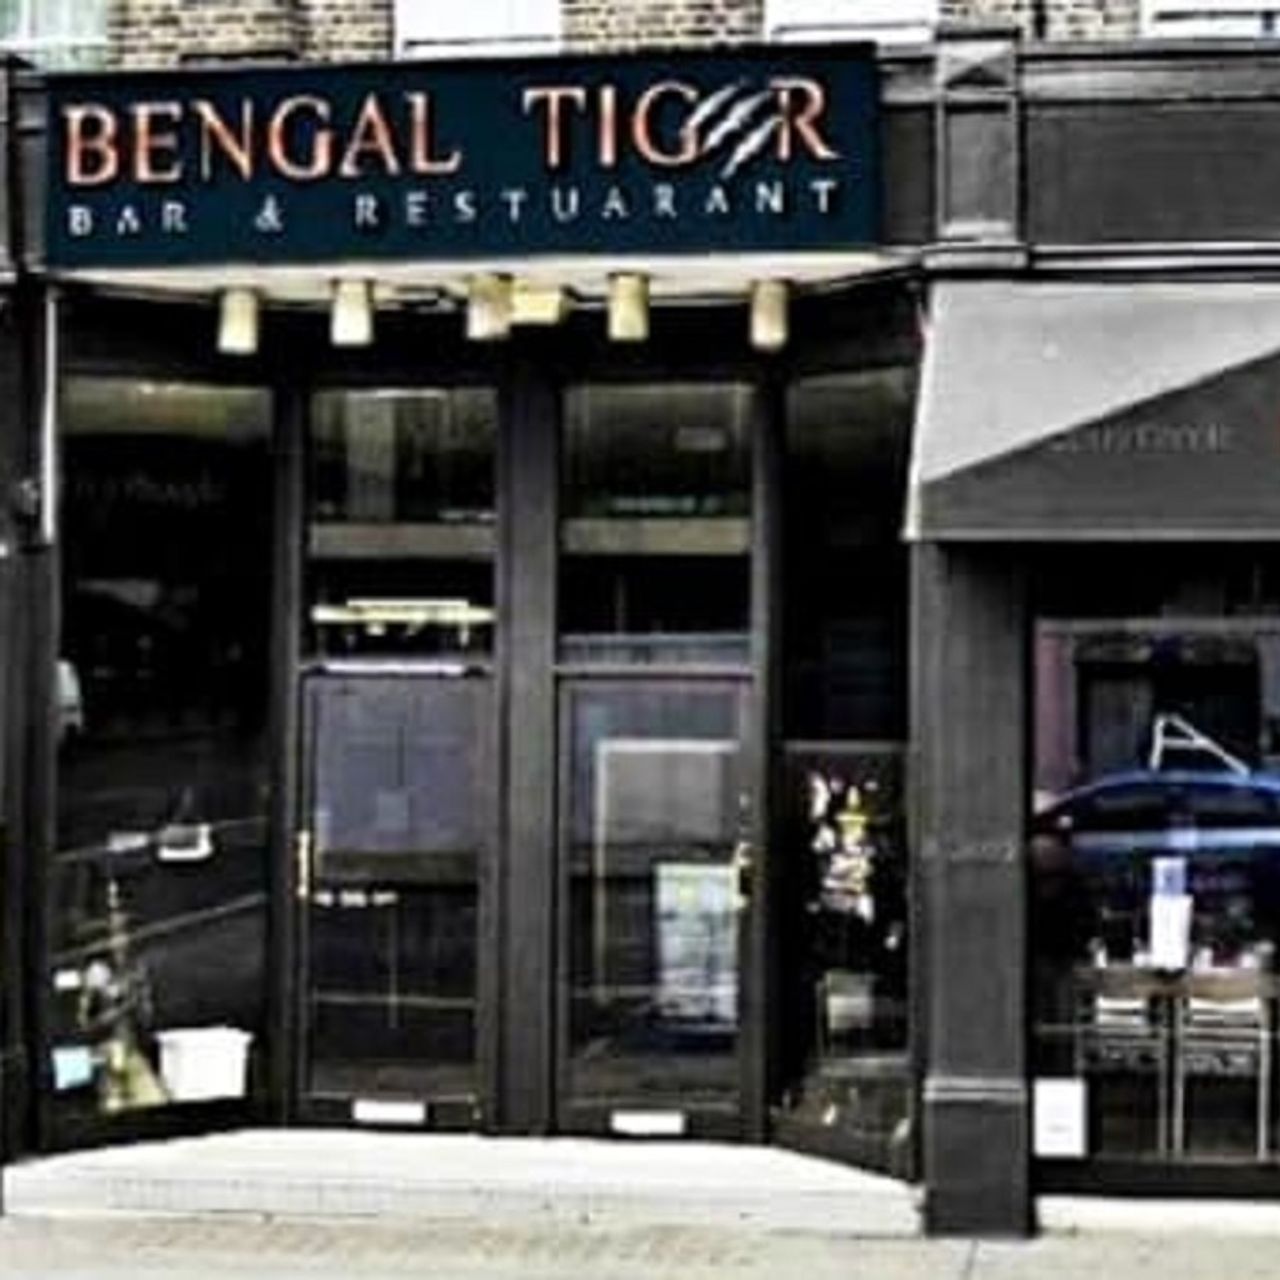 THE BENGAL TIGER INDIAN RESTAURANT - CLOSED - 520 City Rd, South